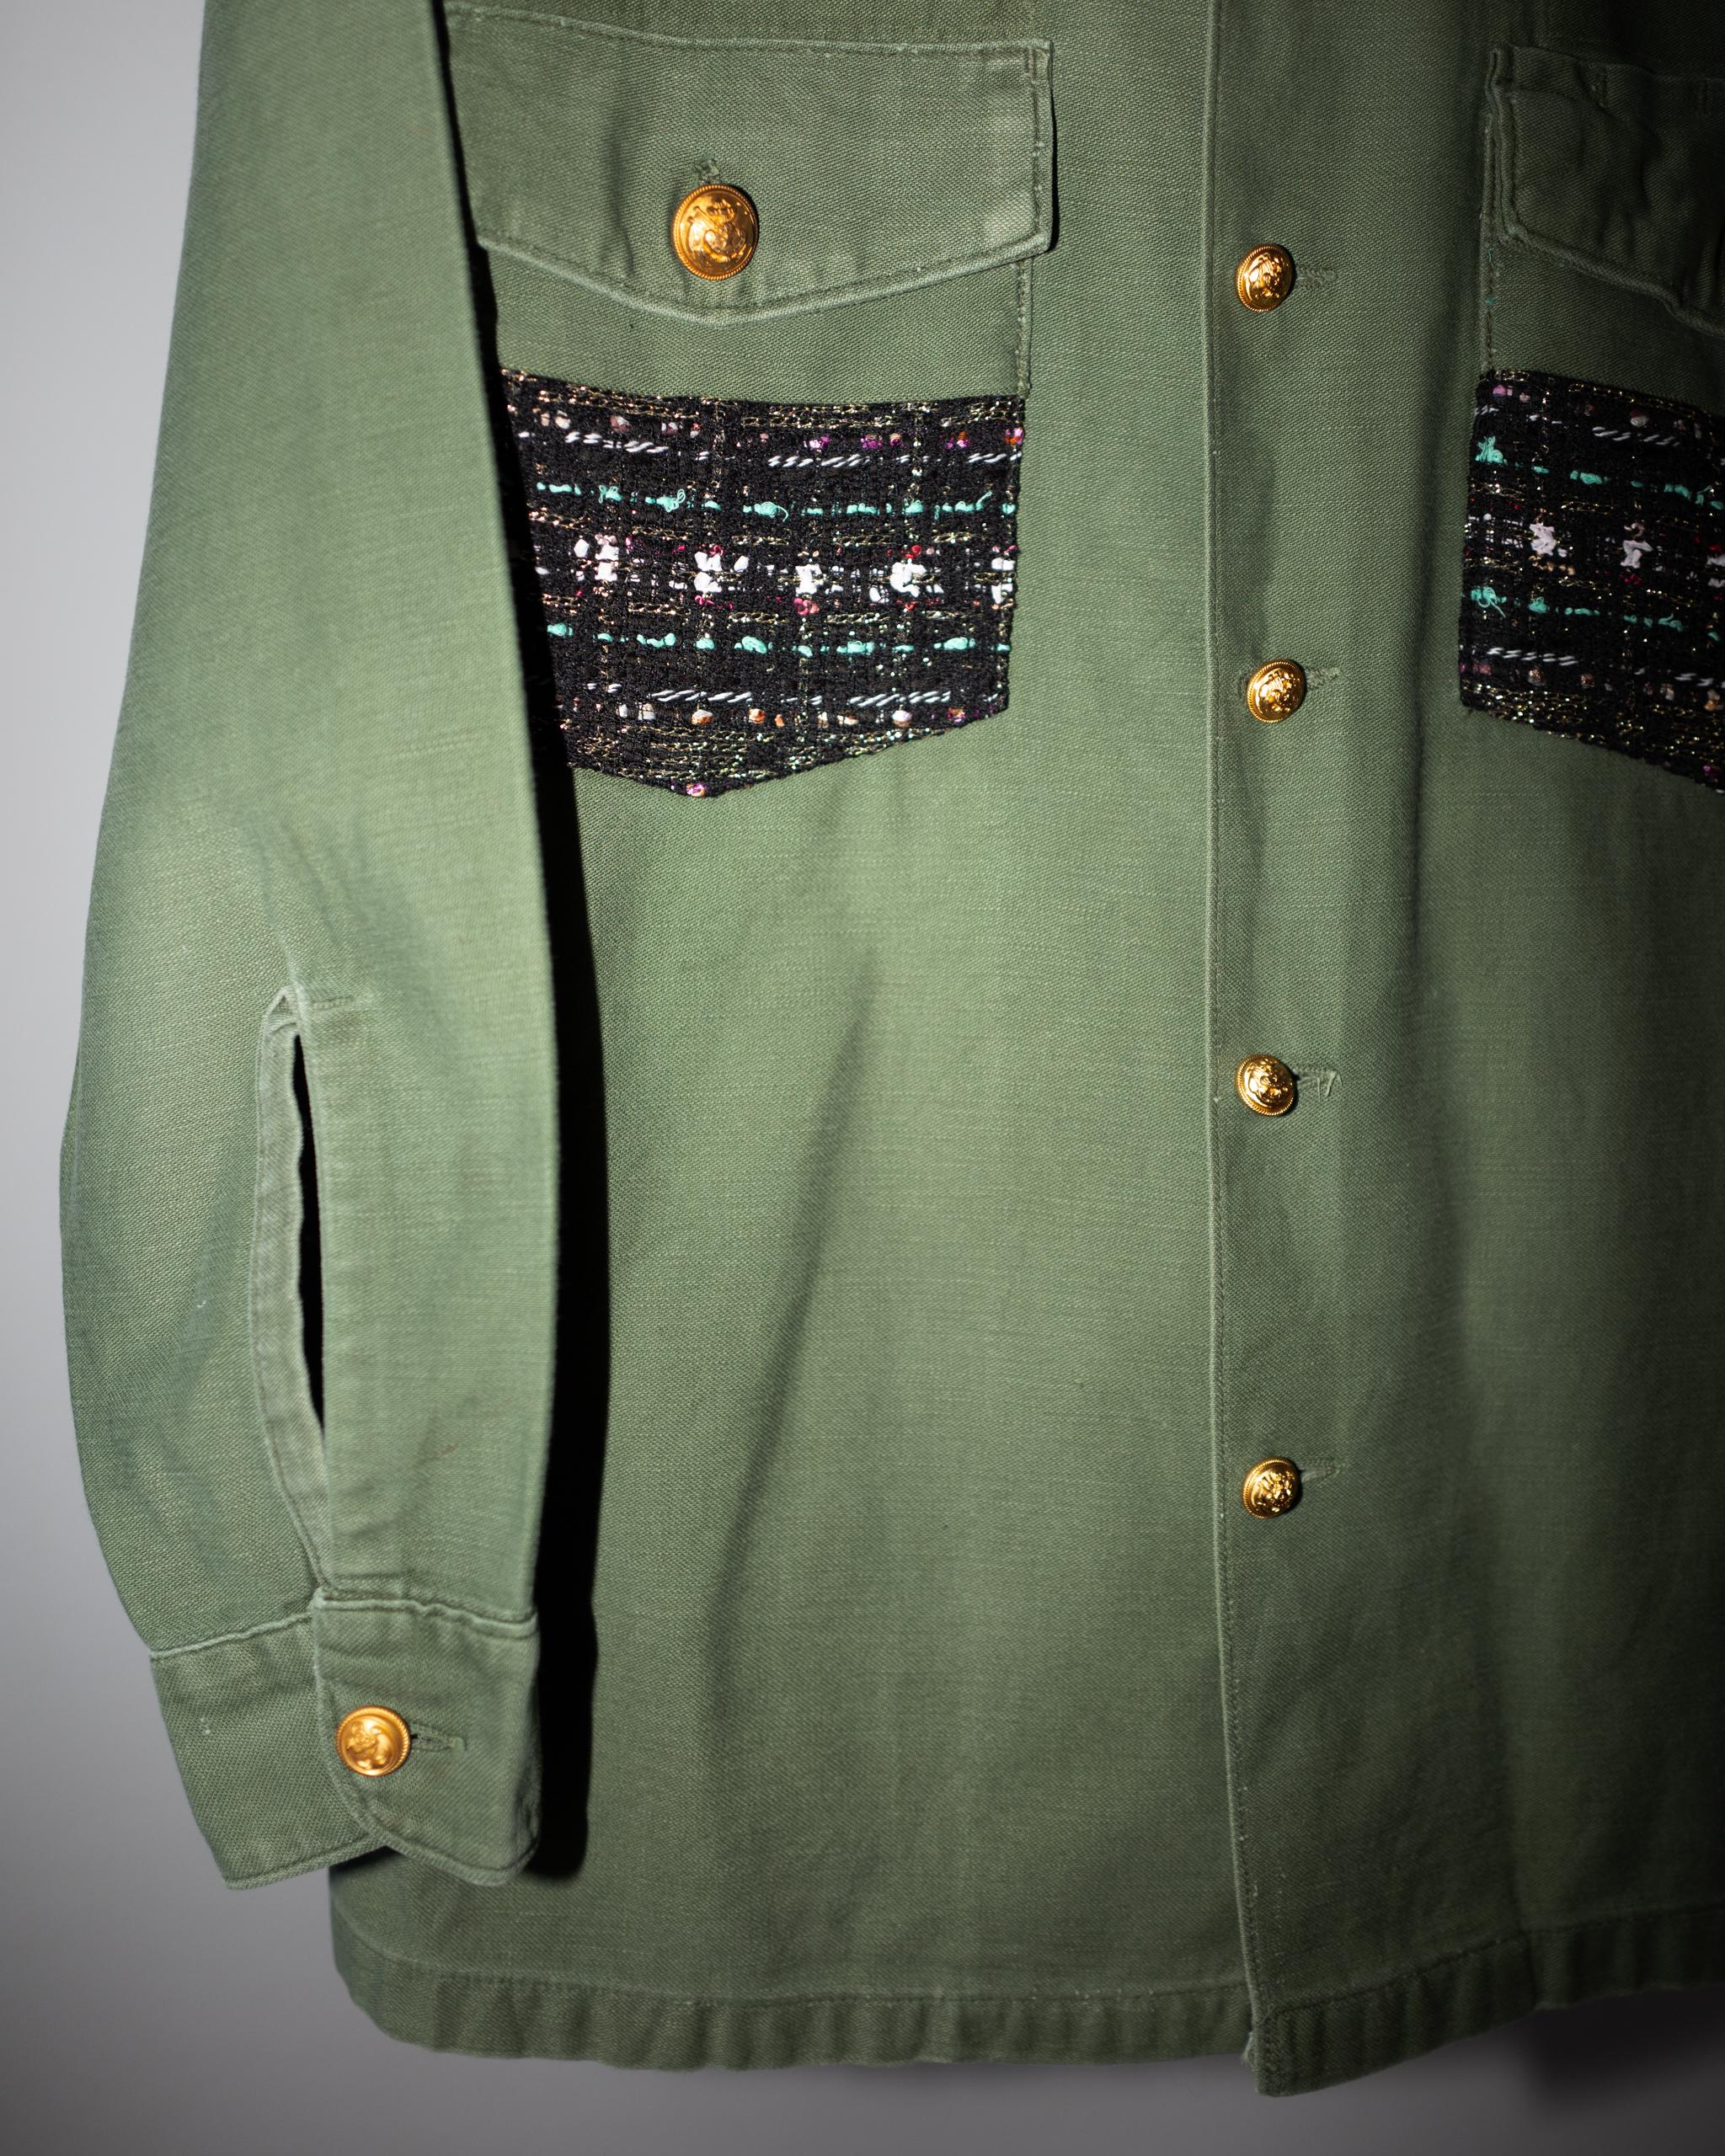 Black Lurex Tweed Pastel Green Collar Vintage GreenMilitary Jacket Gold Buttons For Sale 1